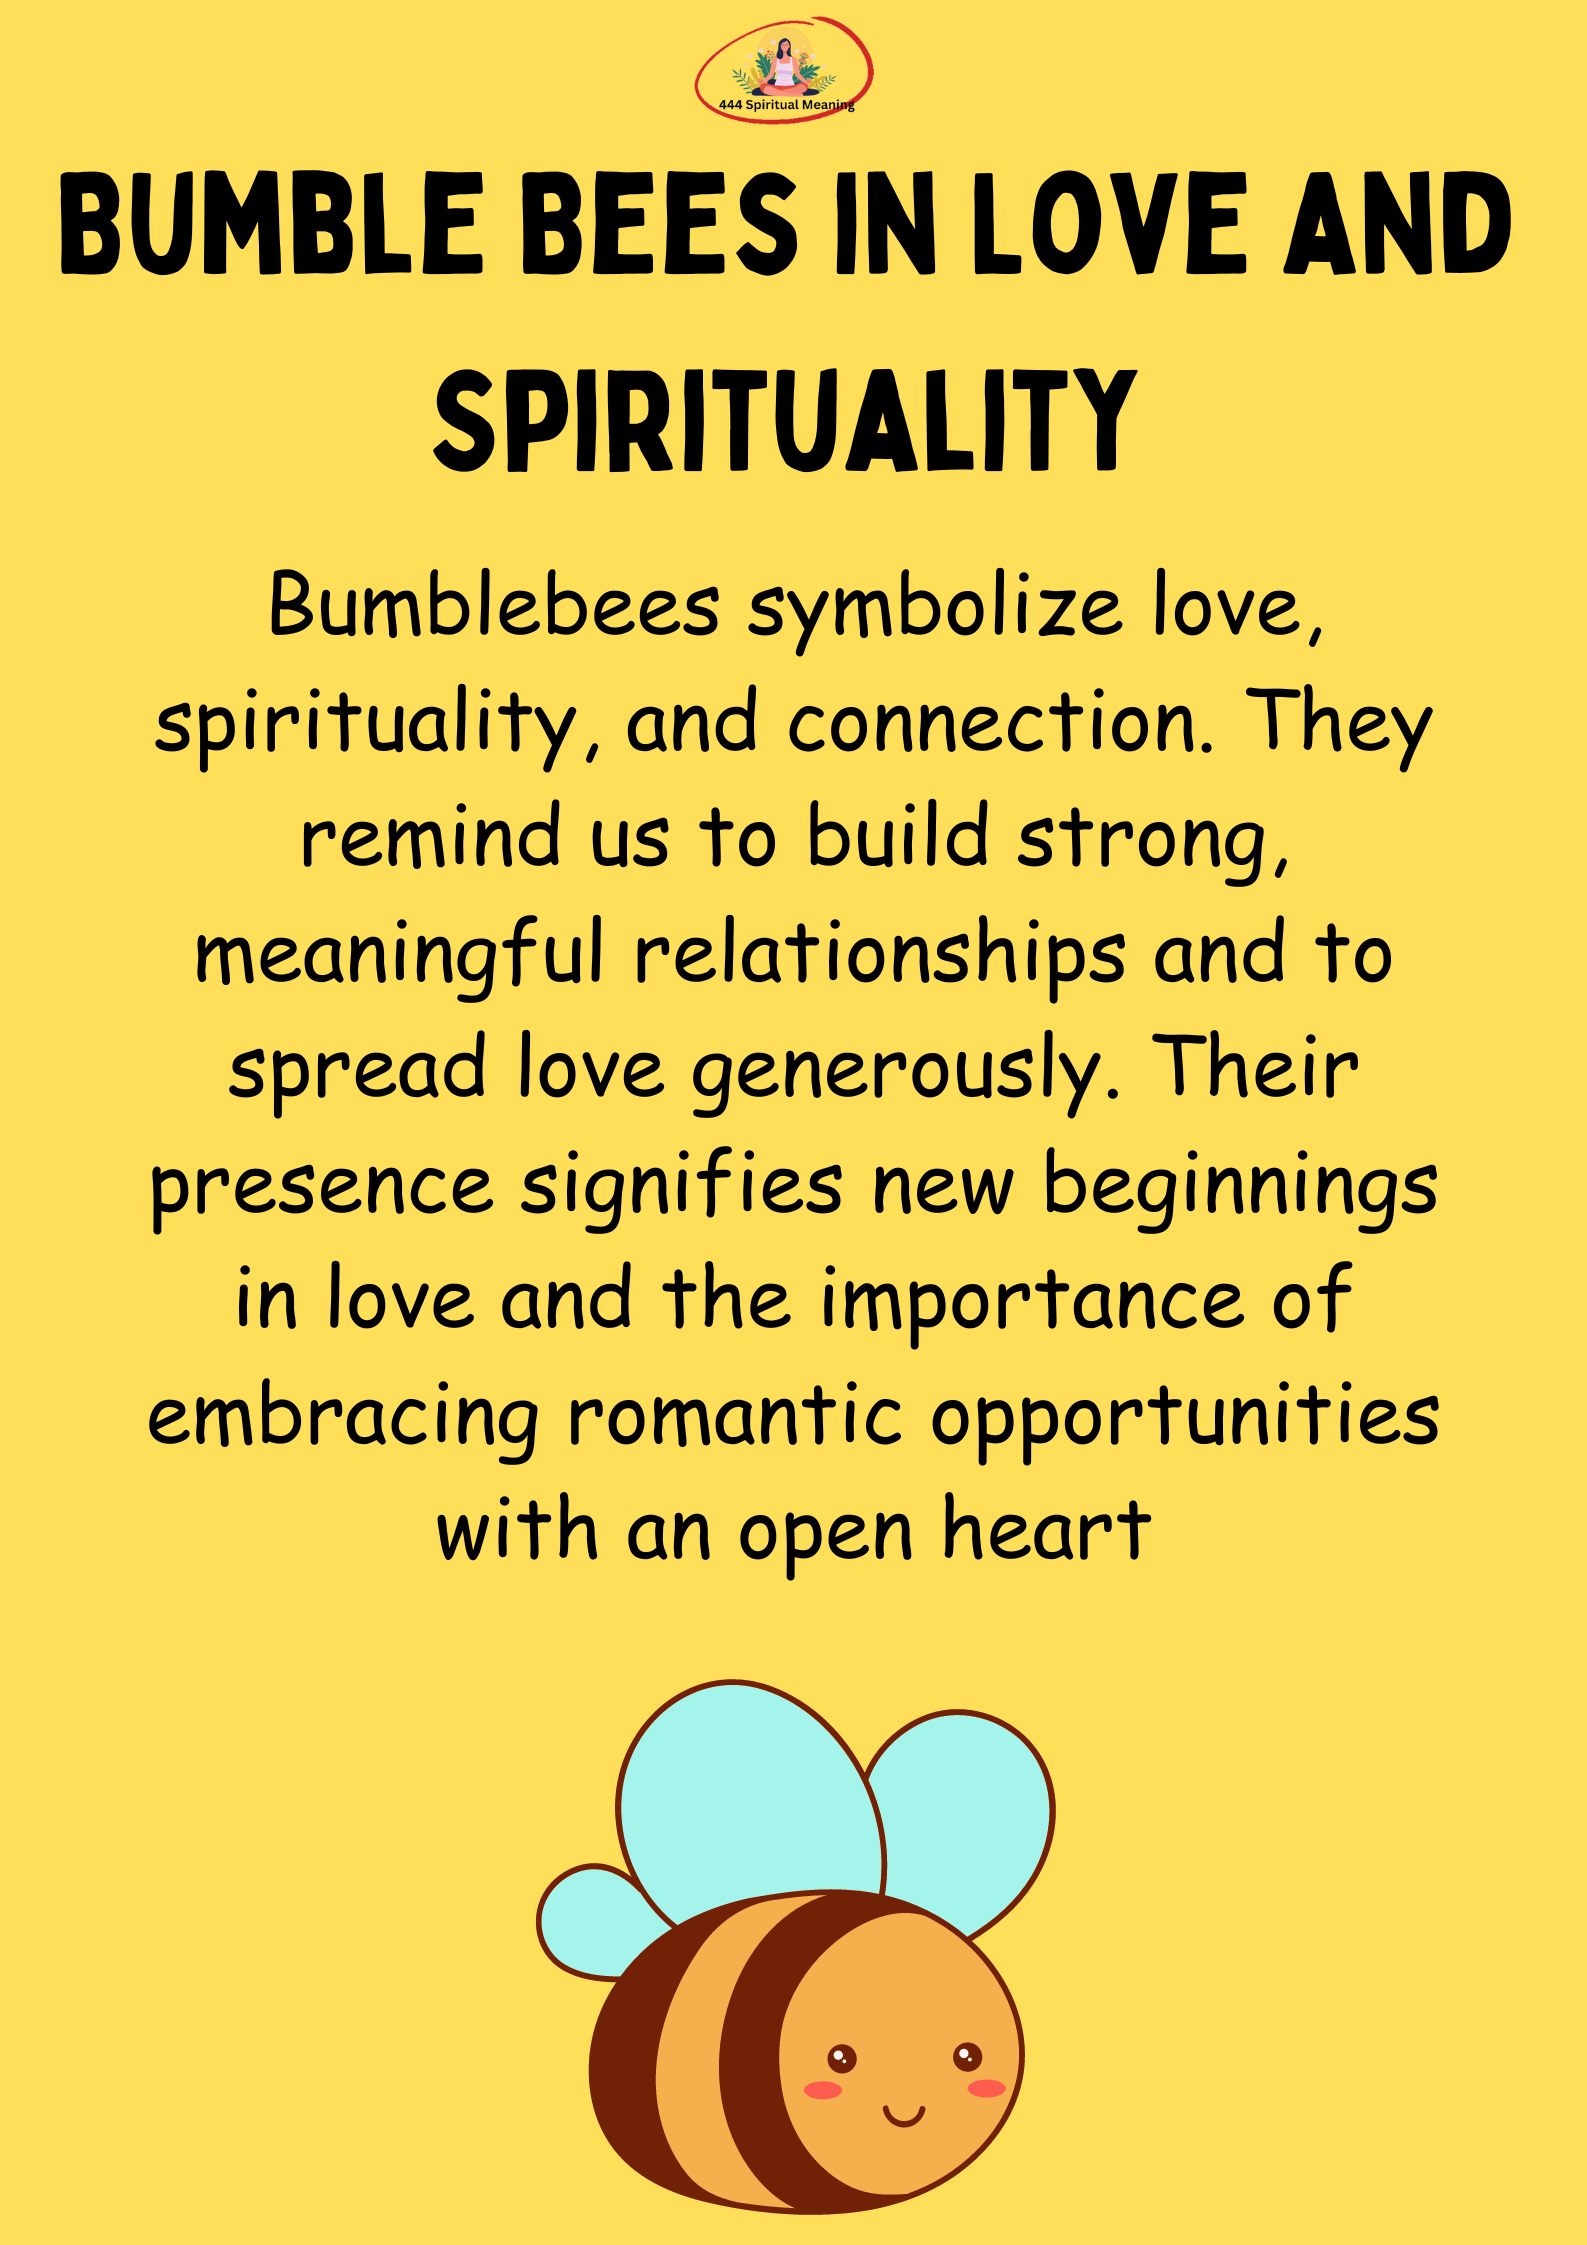 An image featuring two bumblebees with a glowing aura, symbolizing love and spirituality, amidst softly colored flowers. Their harmonious flight and the ethereal light around them emphasize the themes of strong relationships and new romantic beginnings.